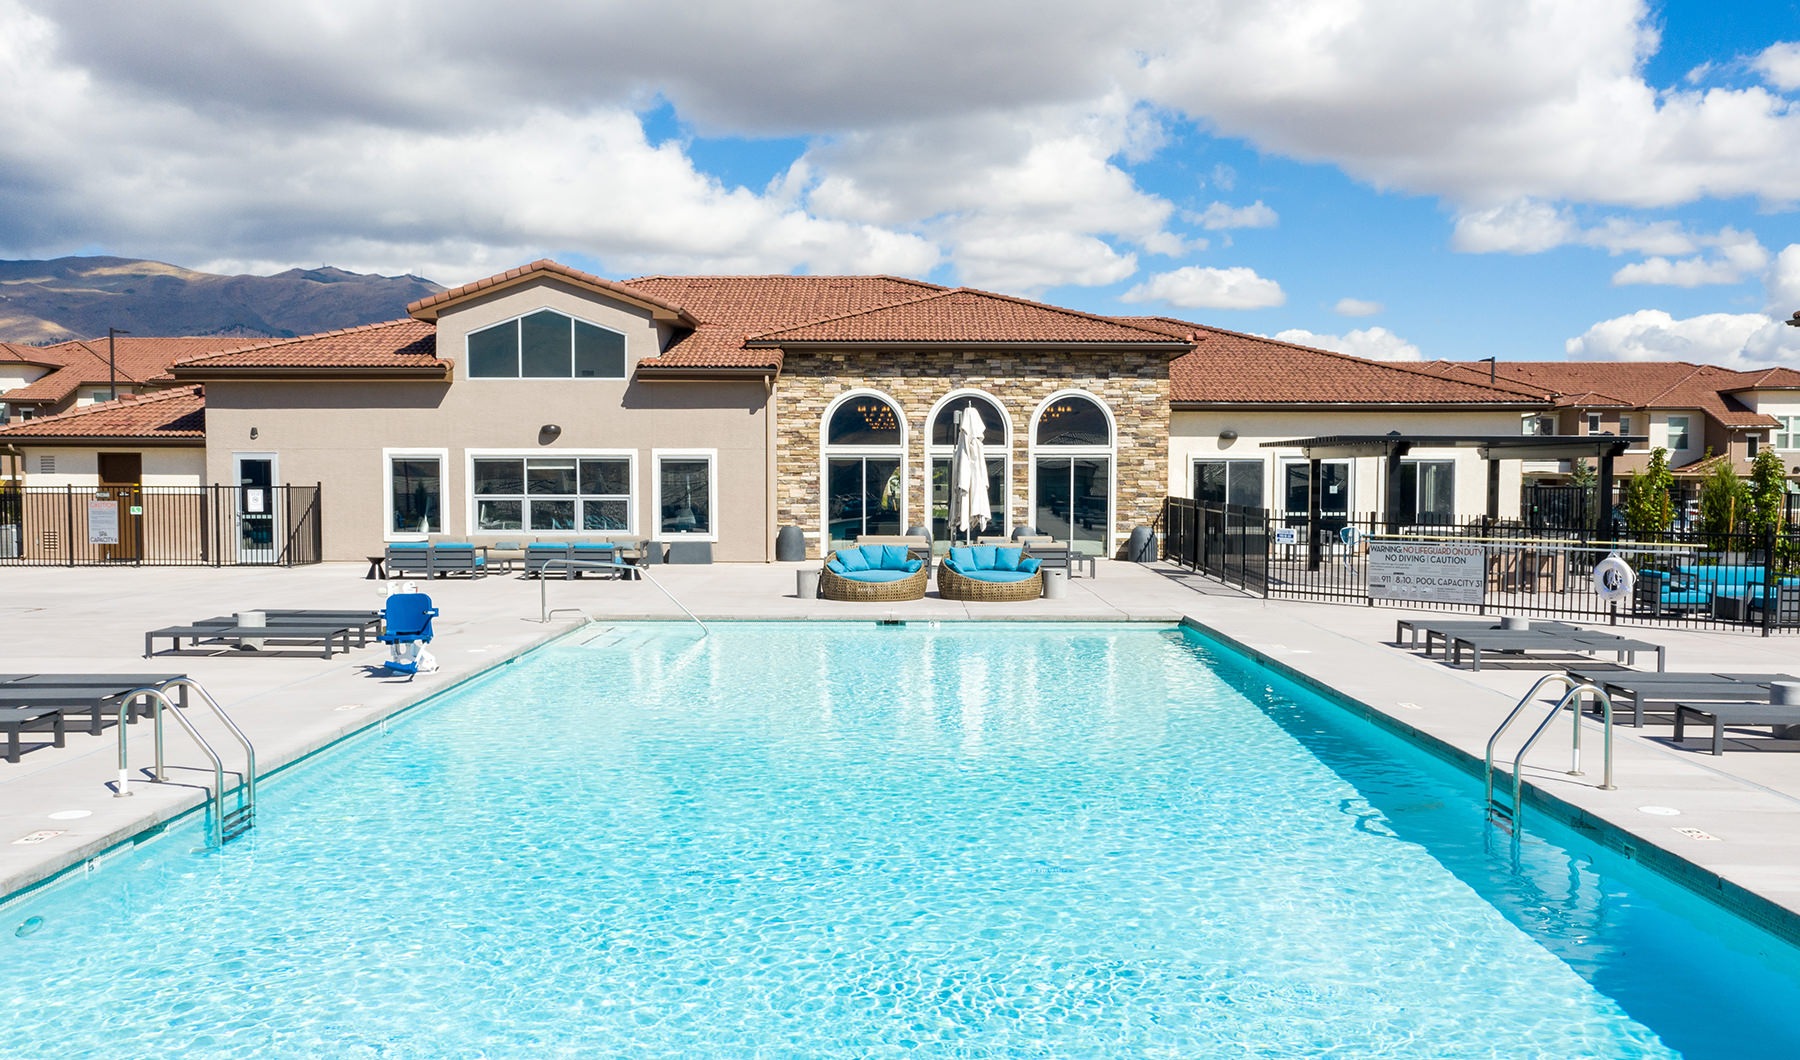 Large sparkling blue pool with sundeck and a large patio 